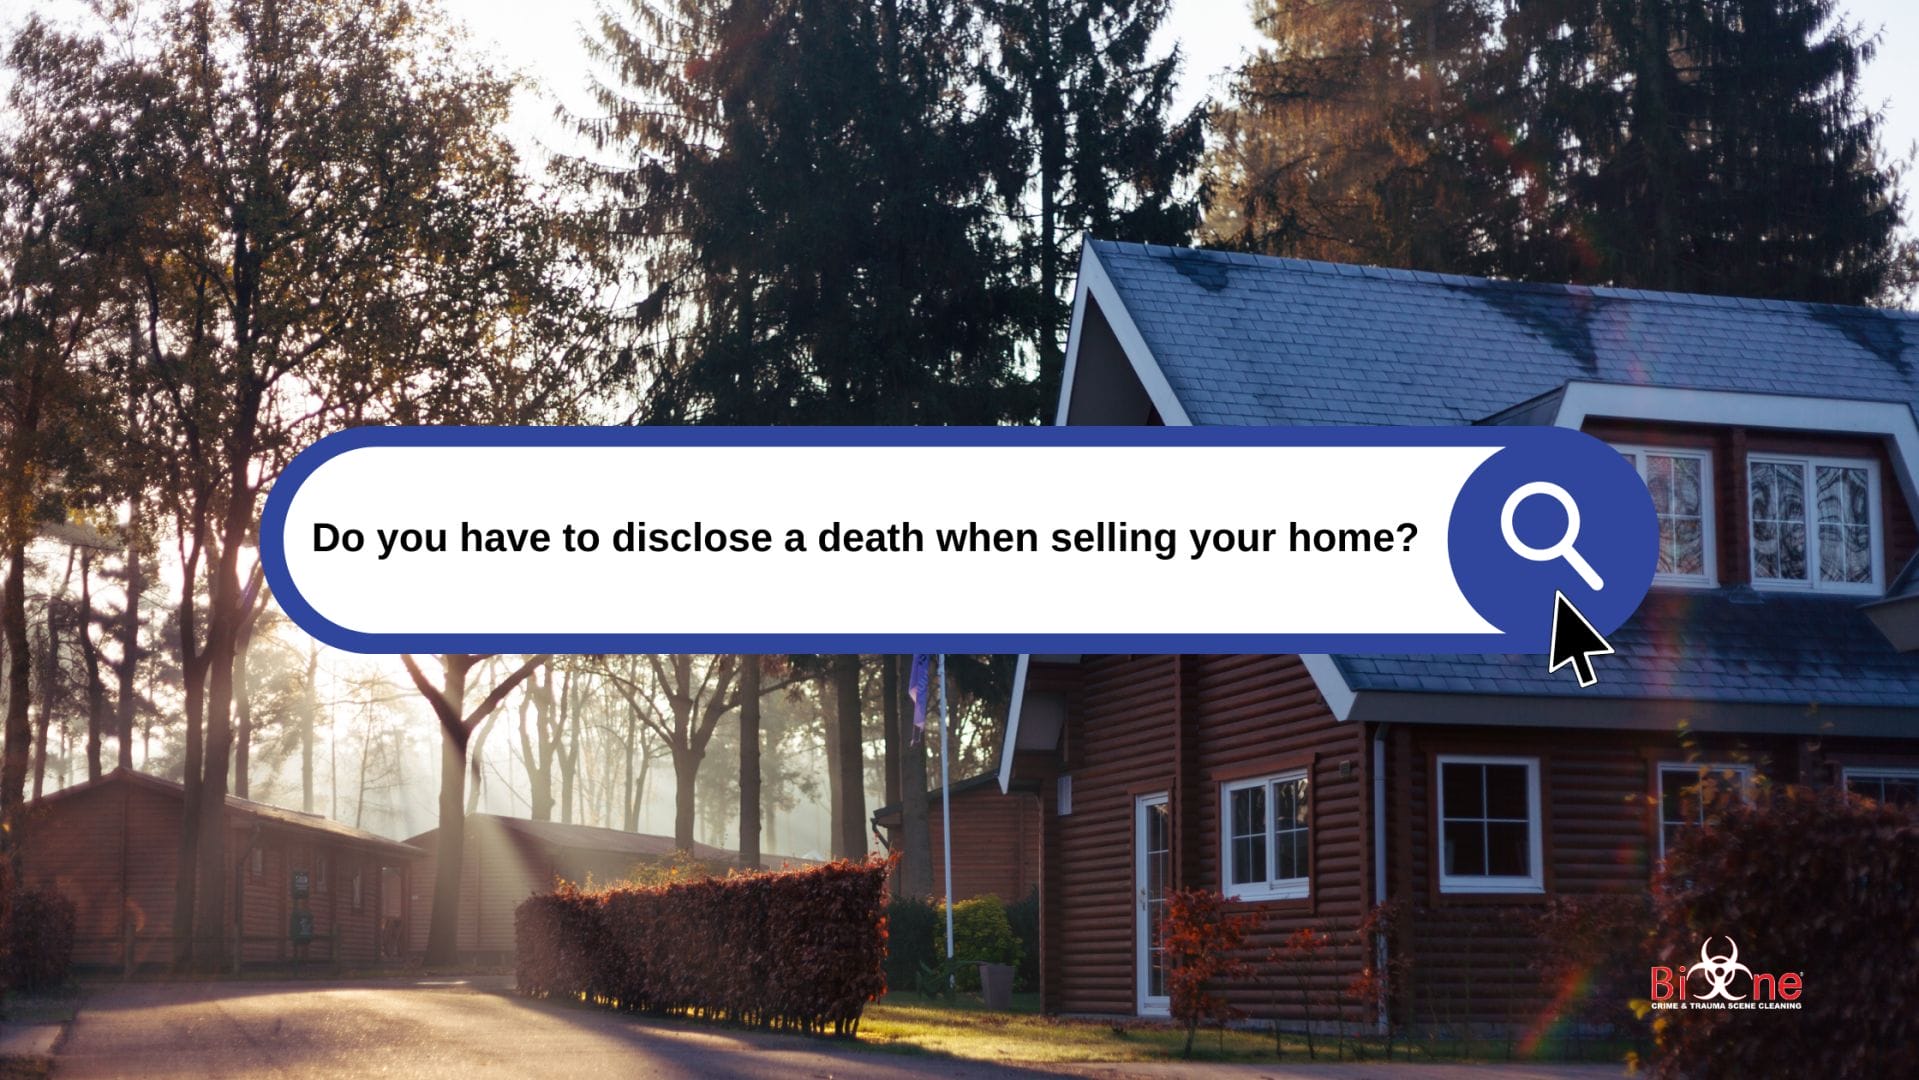 Disclosing death when selling a home